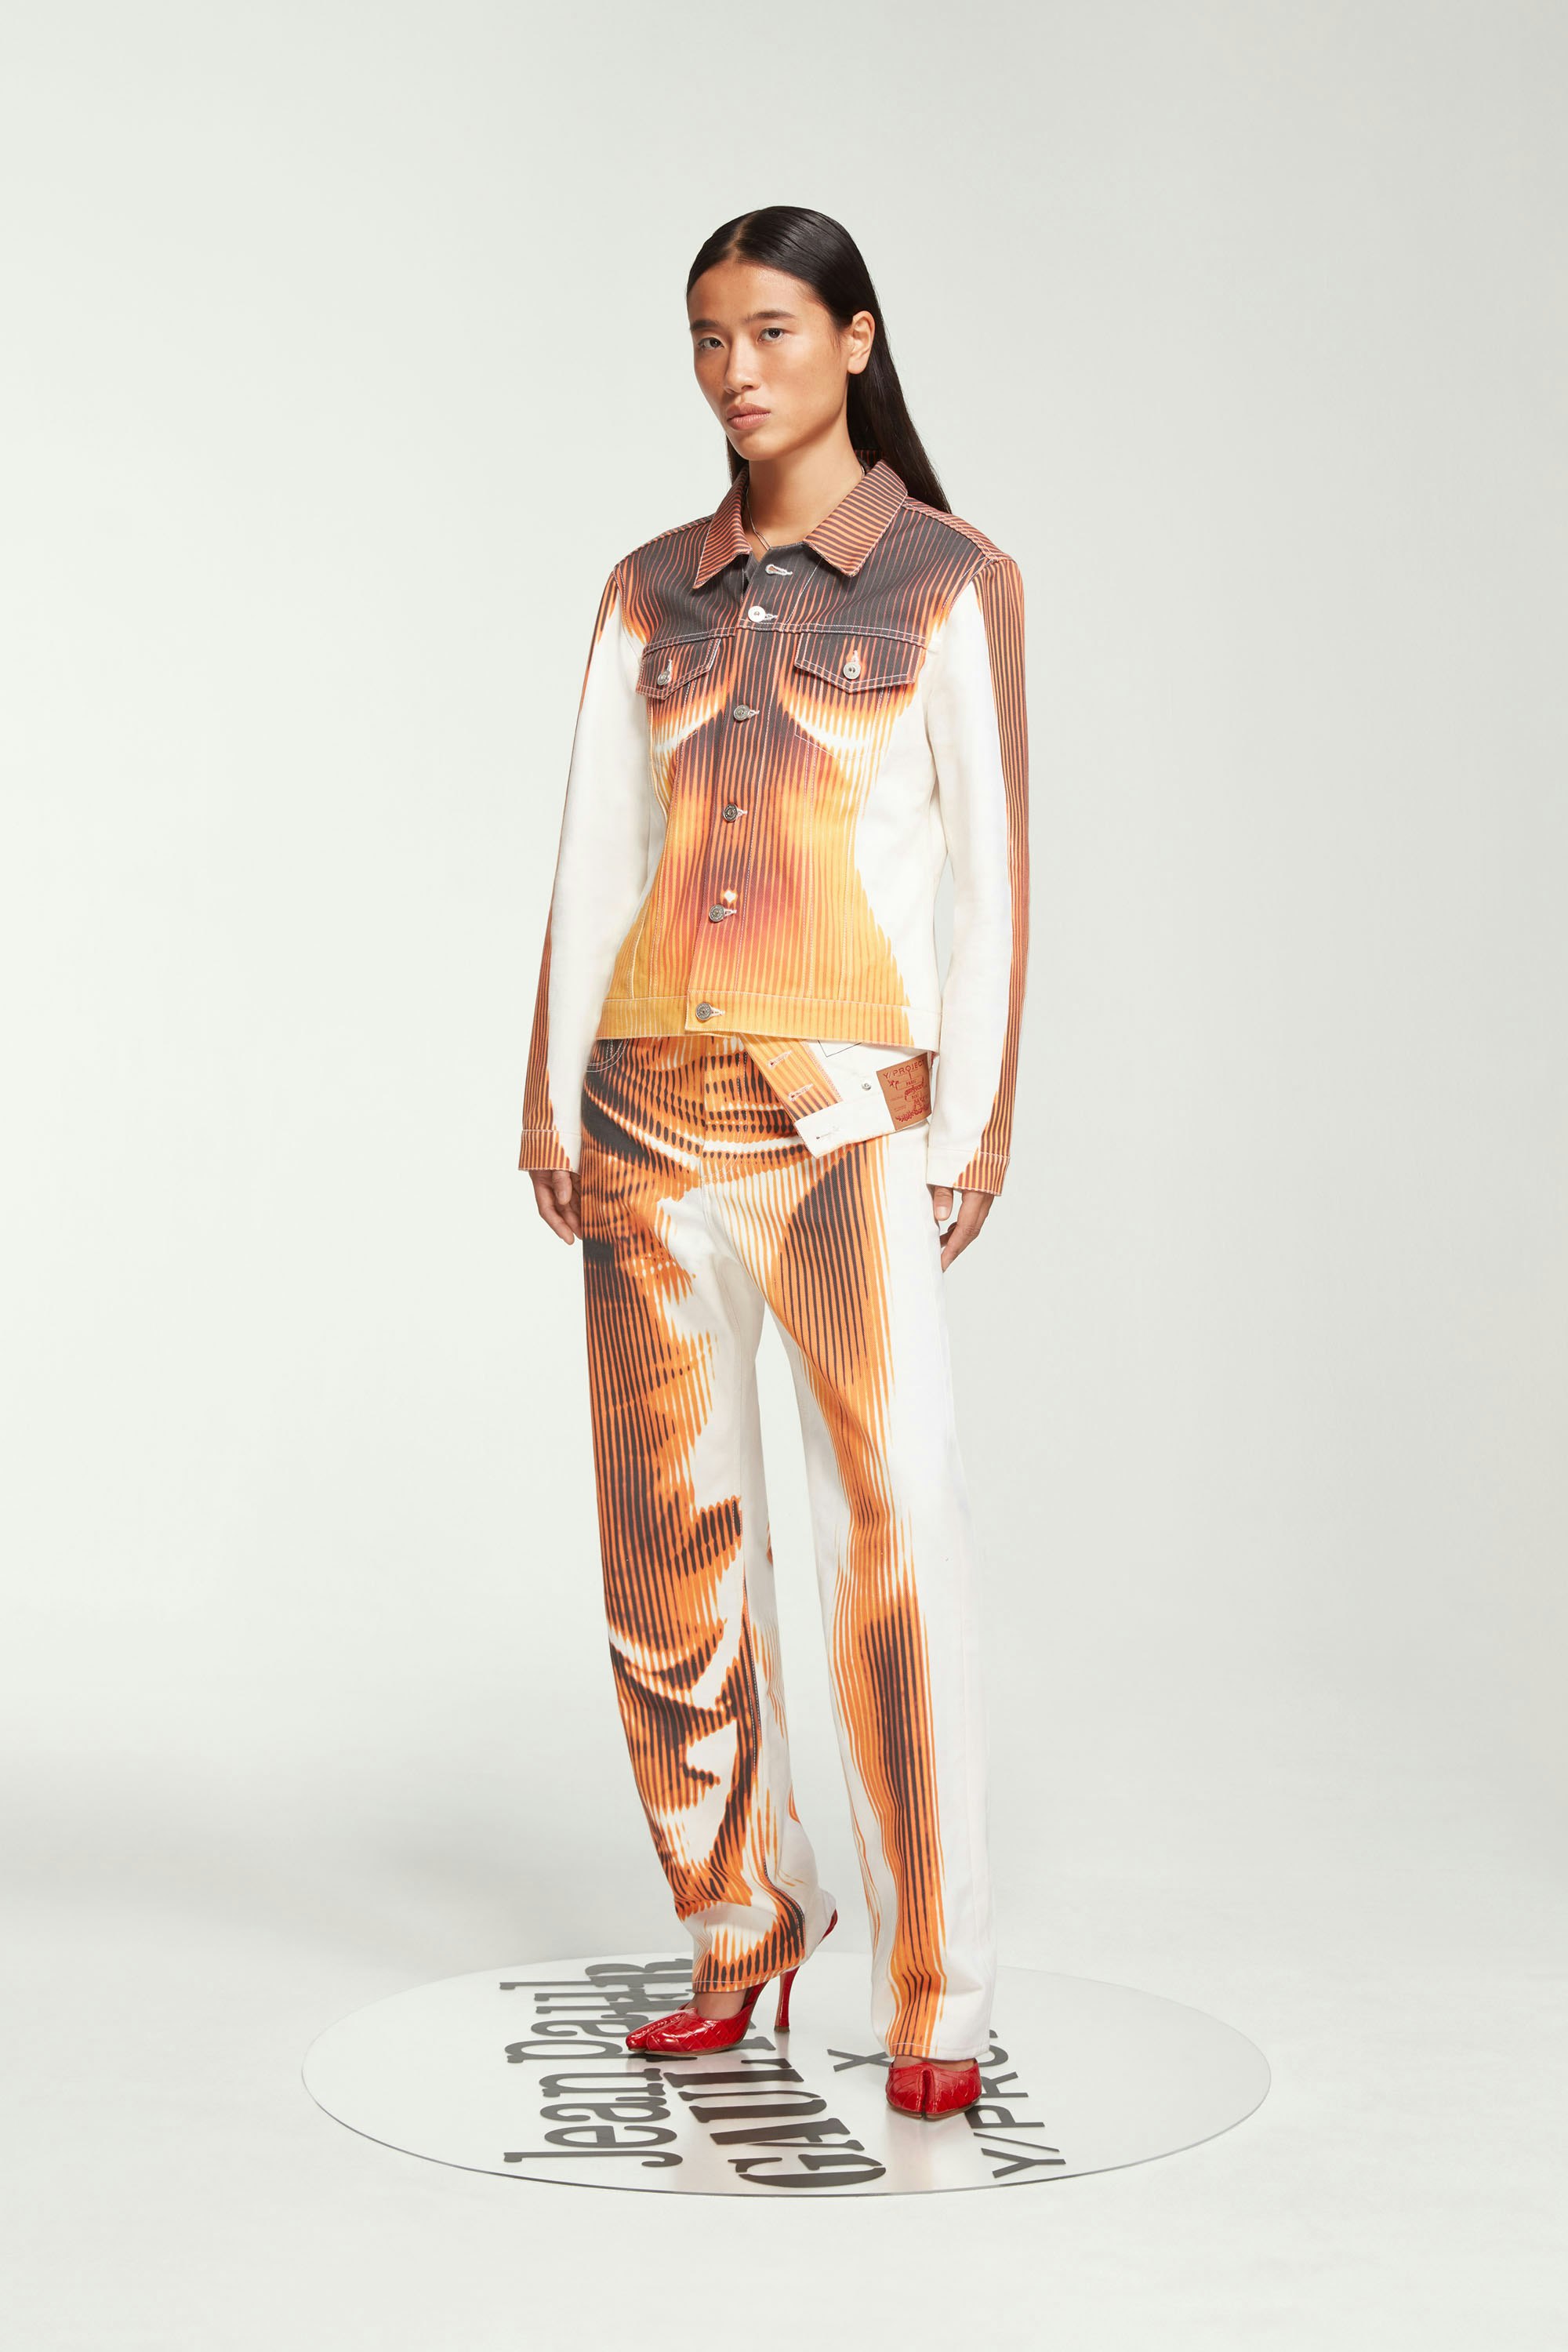 The White & Orange Body Morph Fitted Denim Jacket by Jean Paul Gaultier x Y/Project